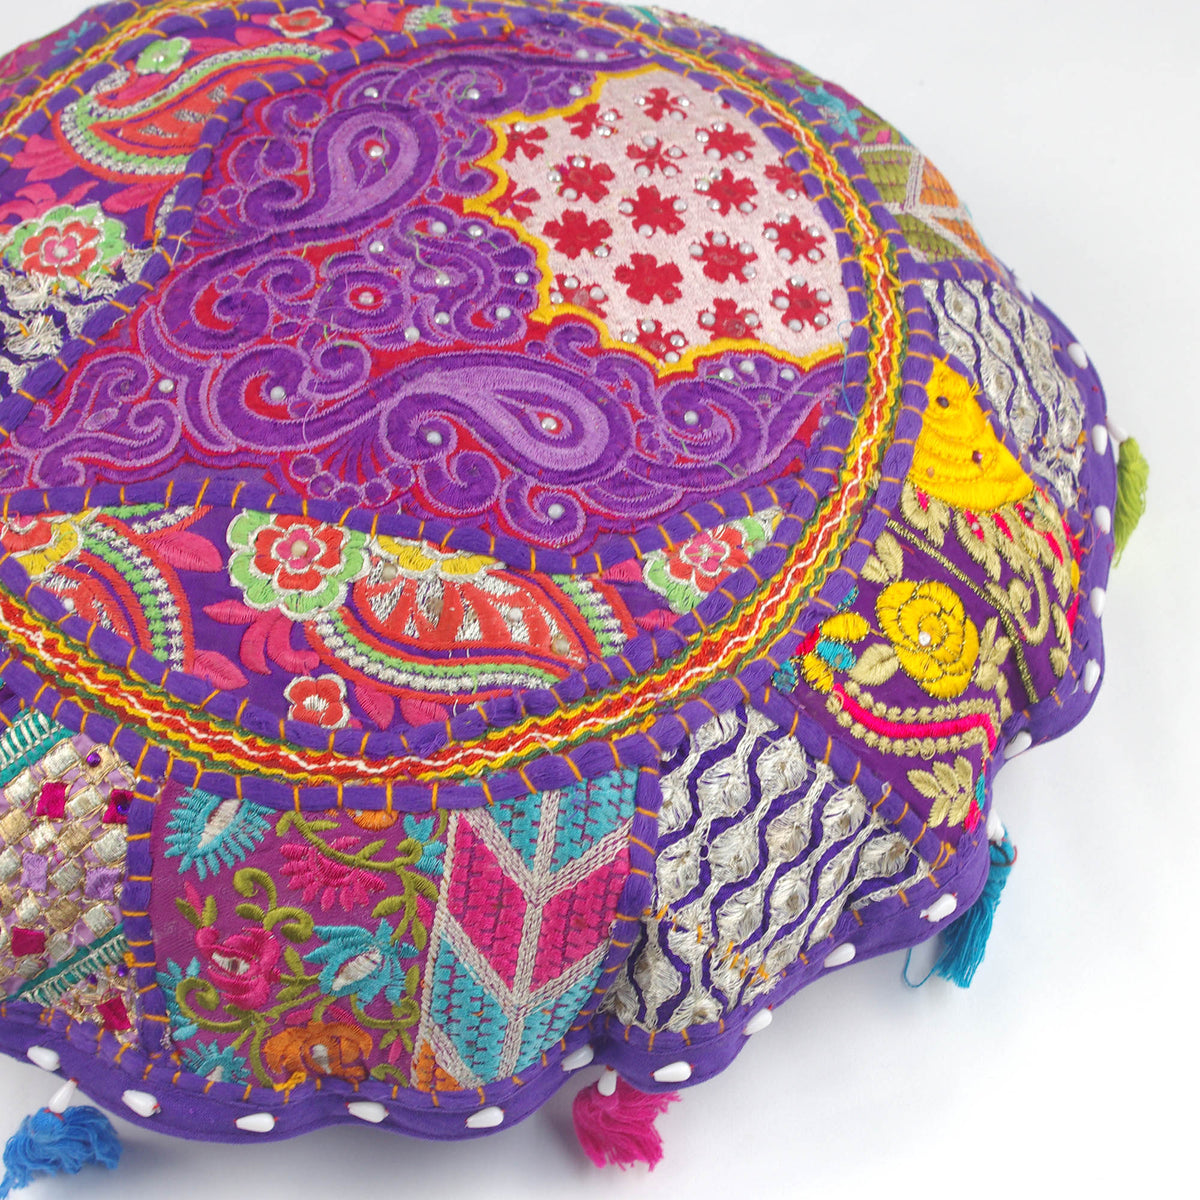 Purple Round Floor Embroidered Patchwork Pouf Ottoman Indian Vintage Cushion Cover 18"